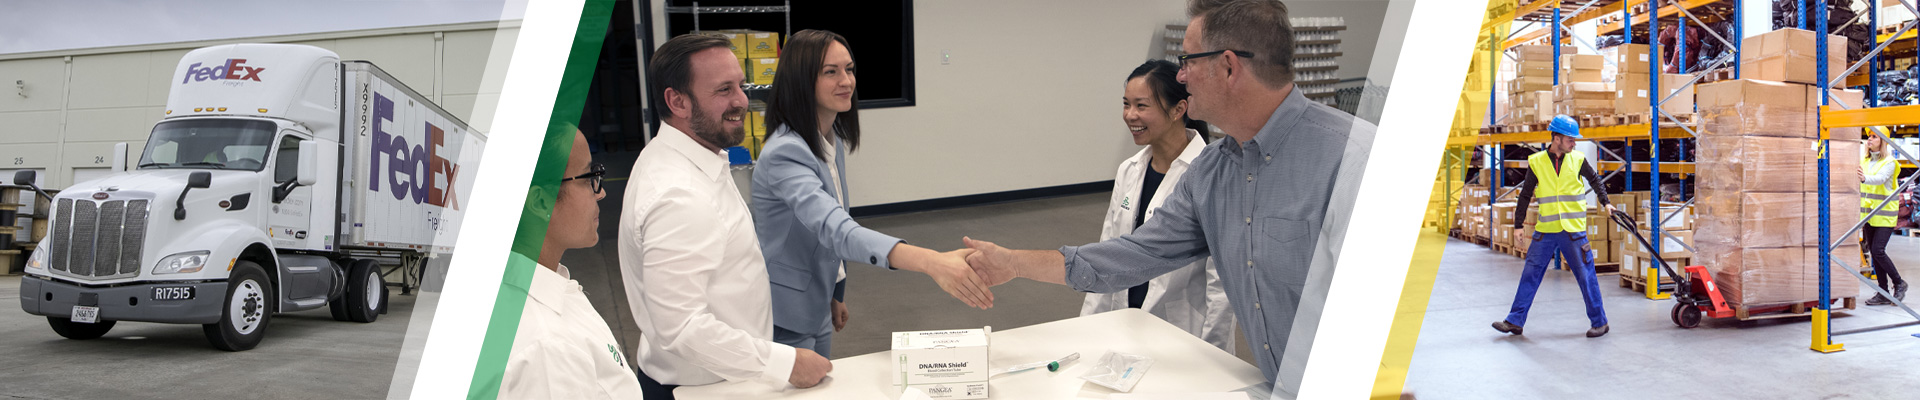 Image of a group of scientists in a discussion and shaking hands.